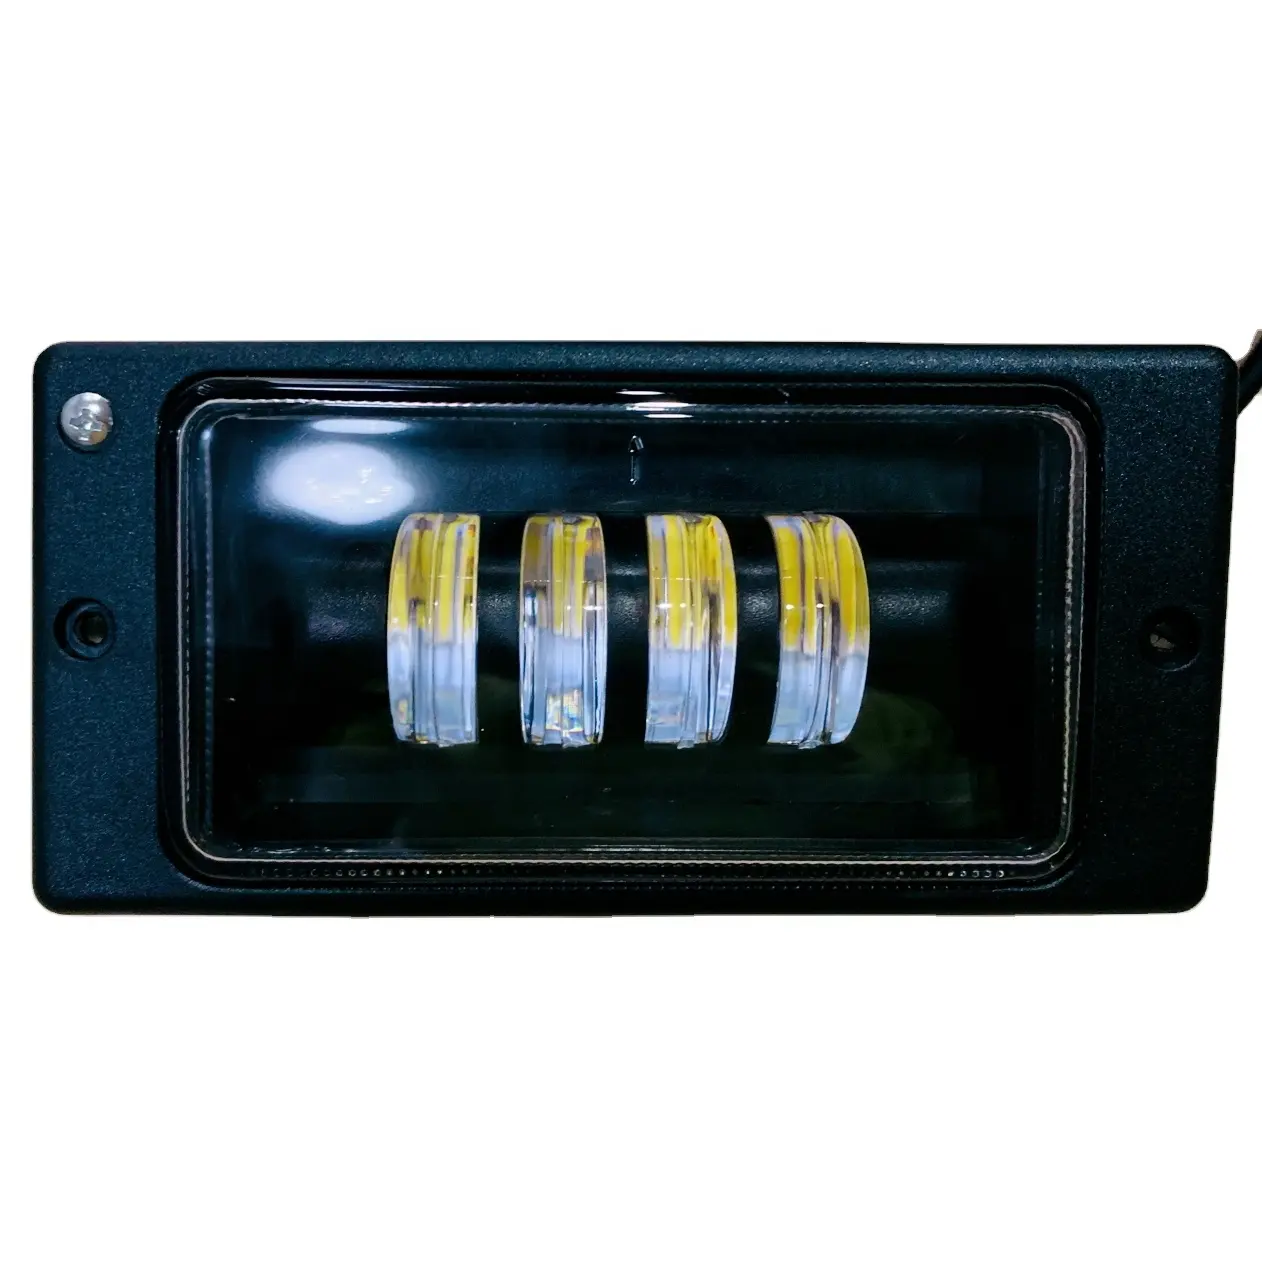 factory price Led Driving Light fog lamp for lada2110 with lens high quality auto fog light for lada vaz Russian car hot sell